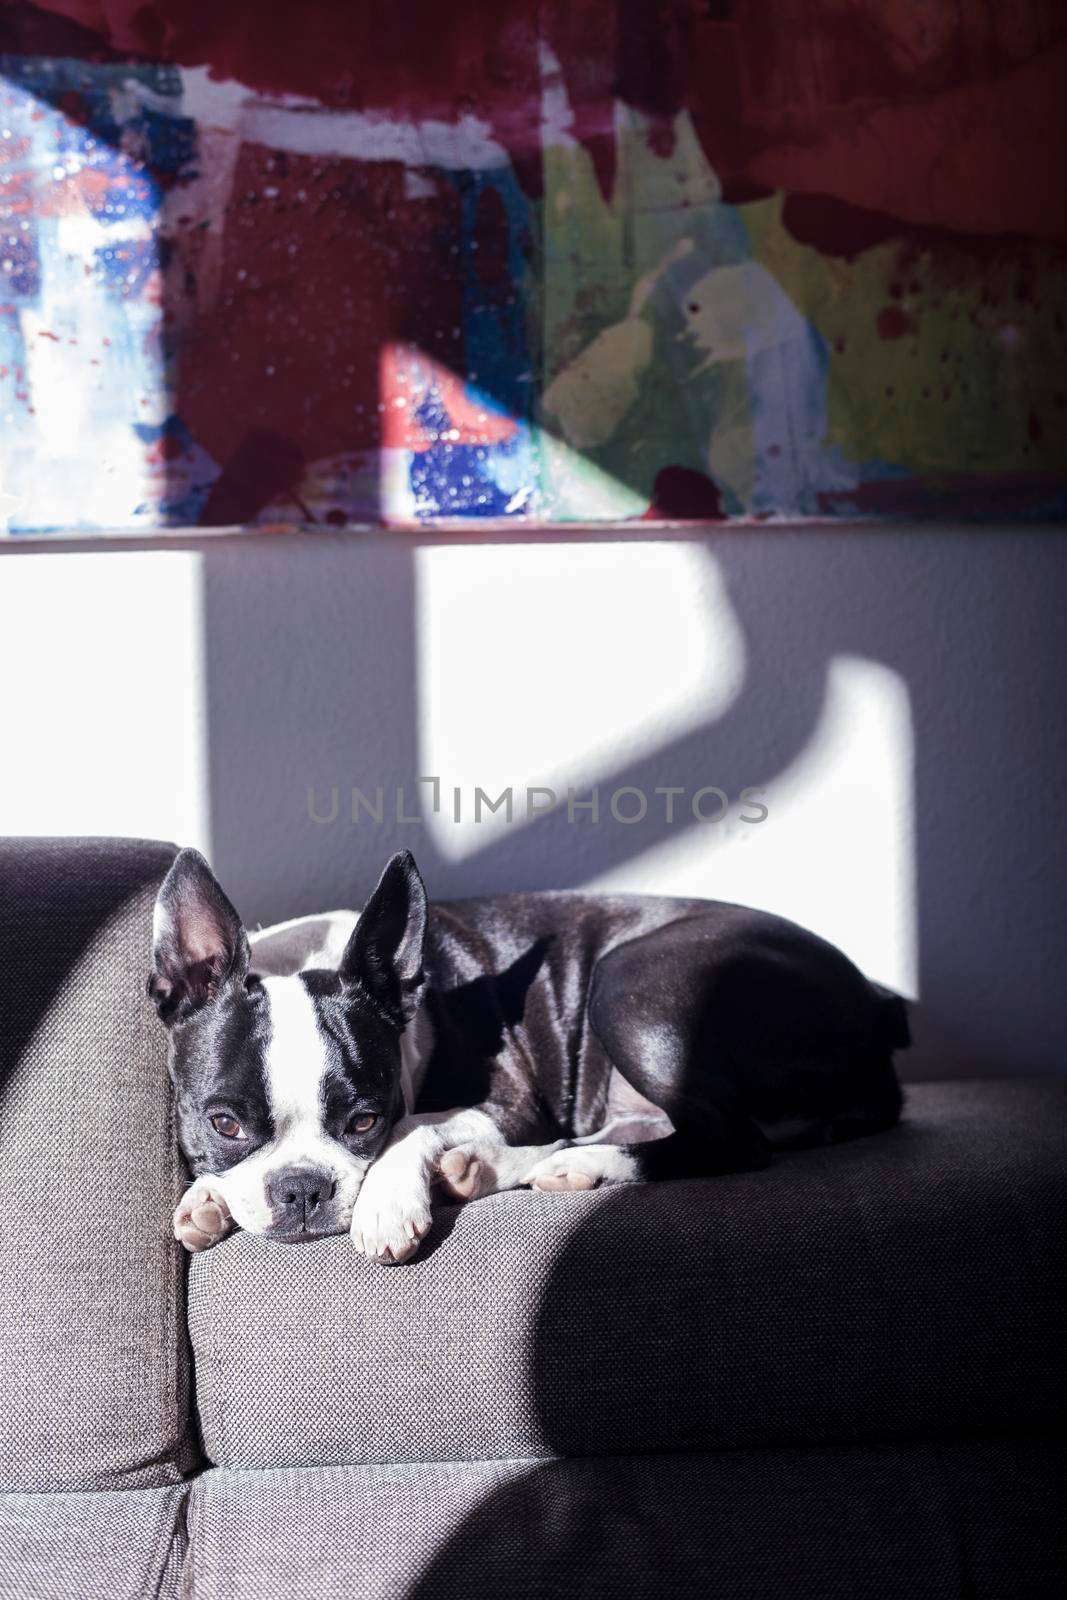 The dog Boston terrier sleeping on the sofa by bepsimage